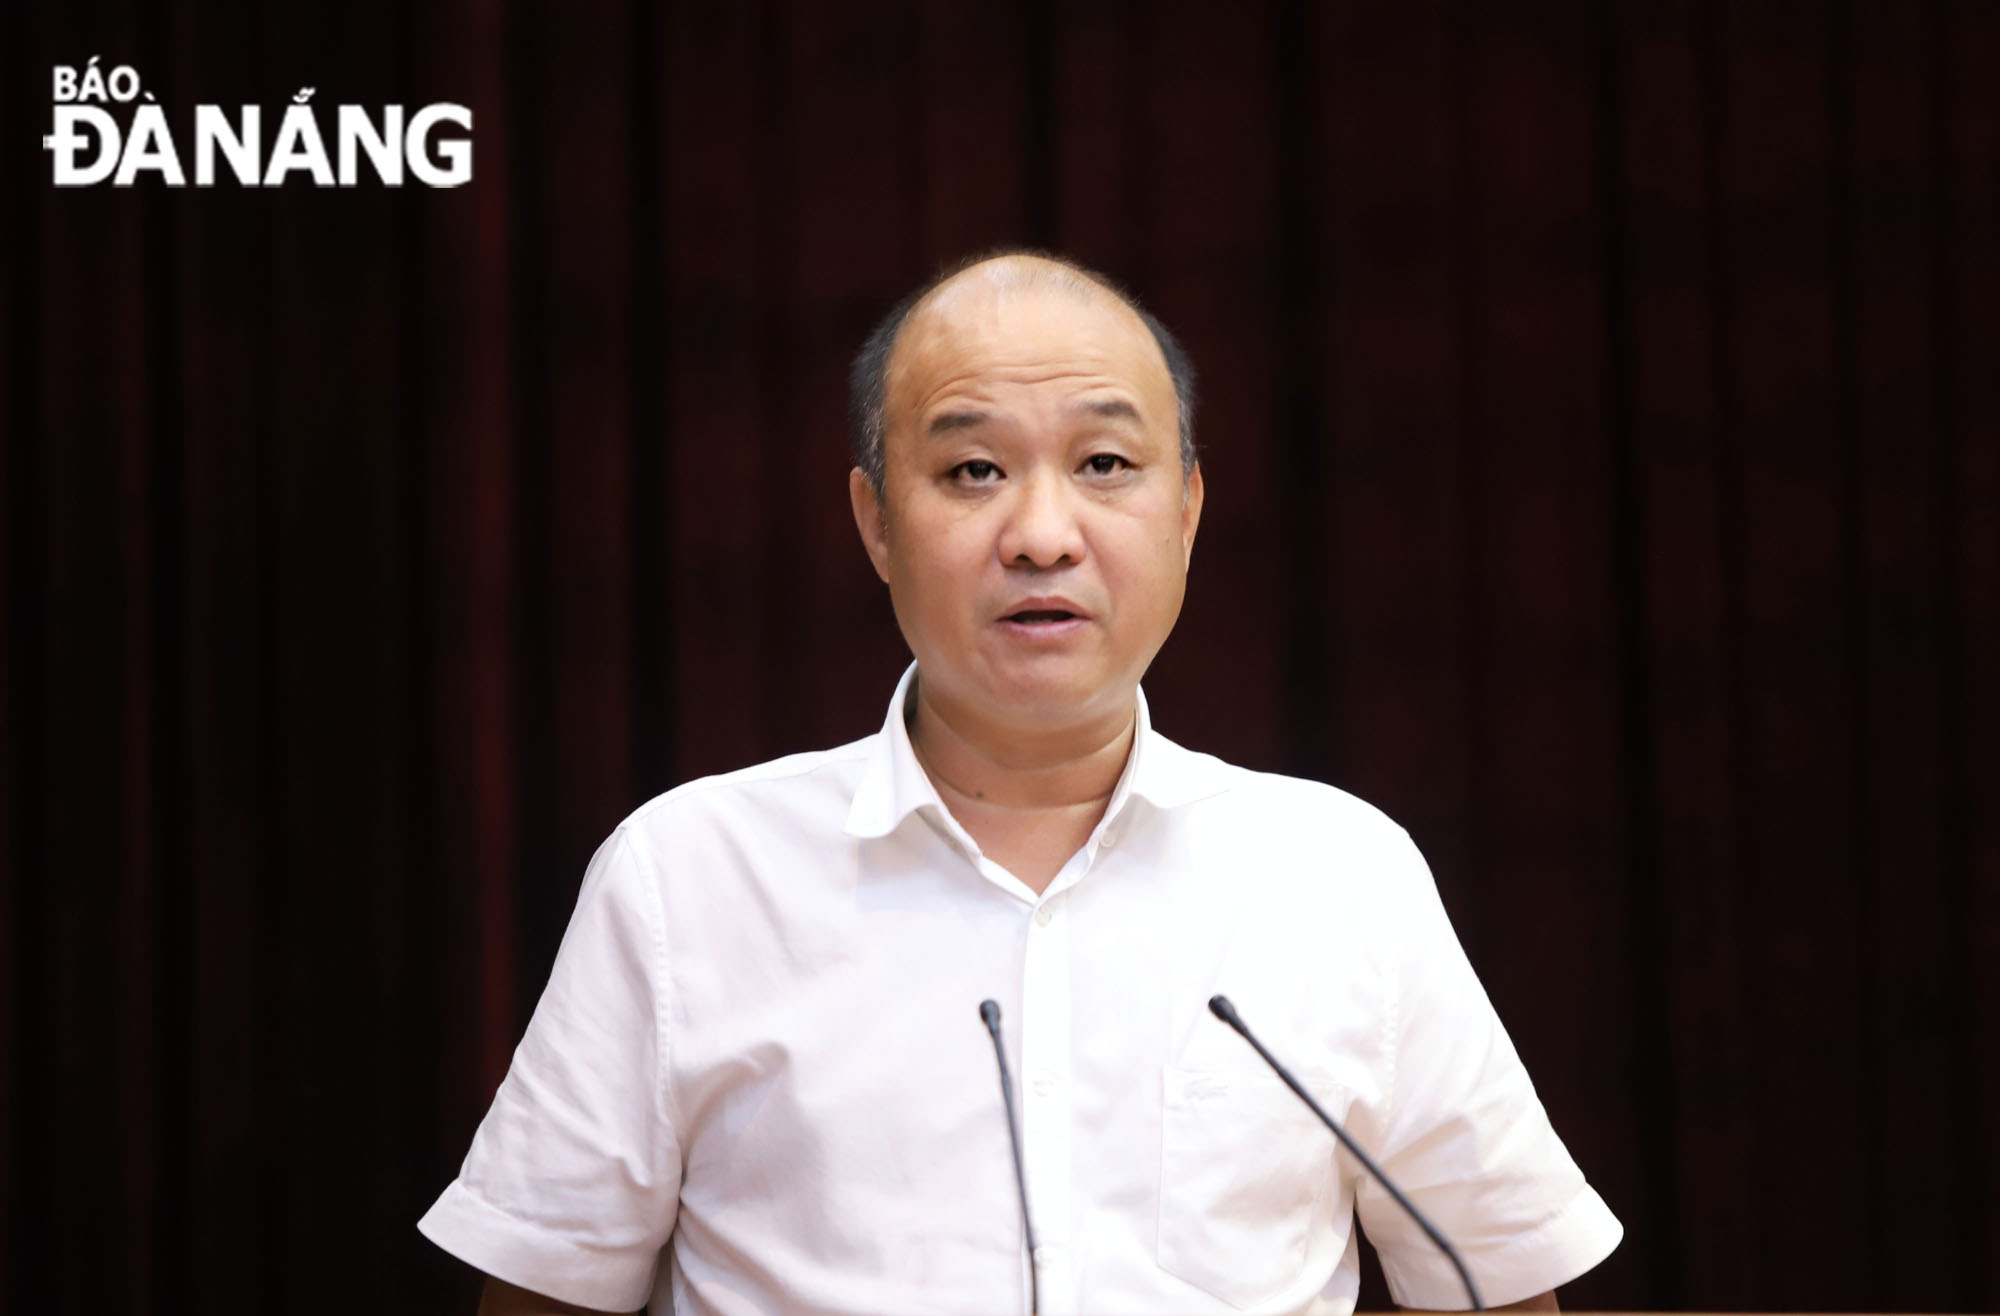 Da Nang People’s Committee Vice Chairman Le Quang Nam speaking at the online event. Photo: NGOC PHU